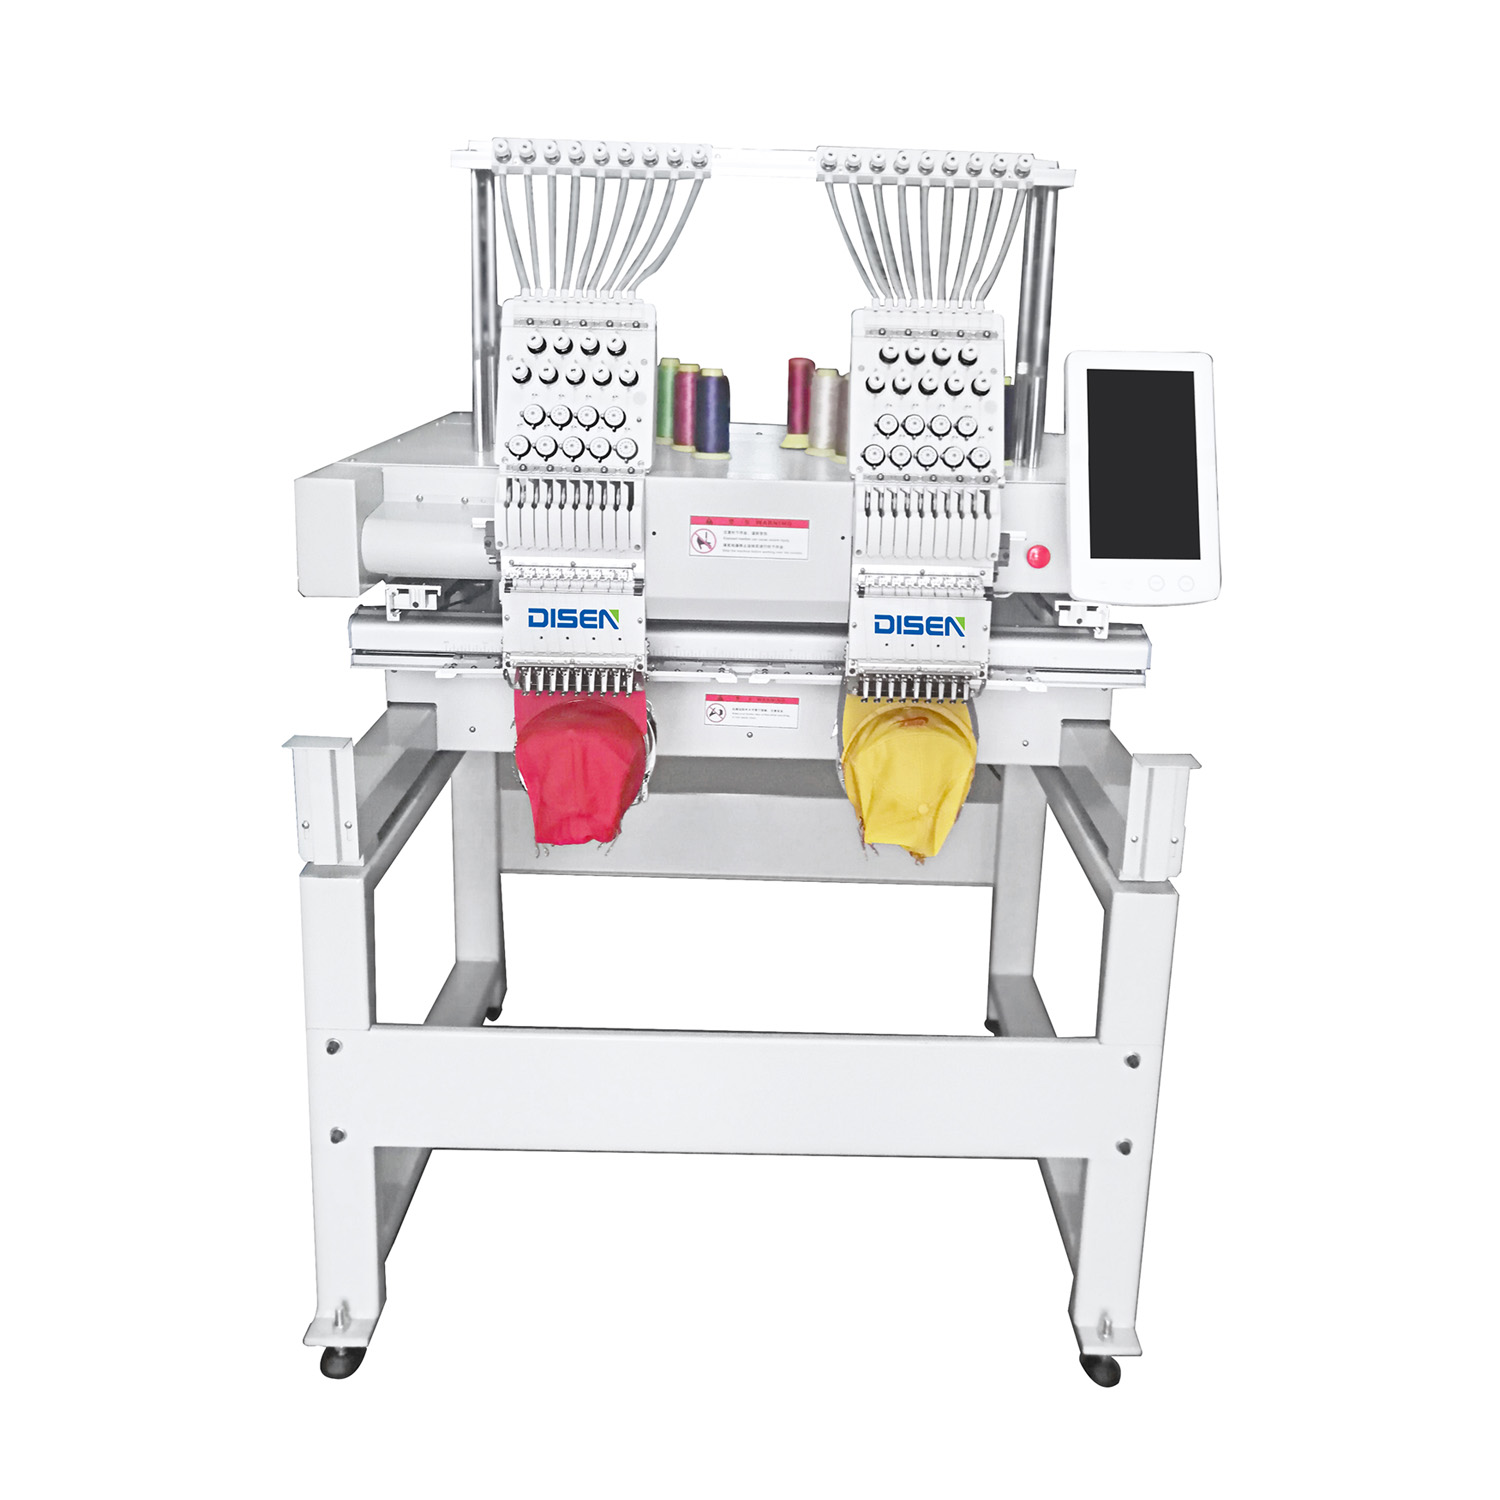 Digital Laser positioning Two Head Embroidery Machine For Clothing